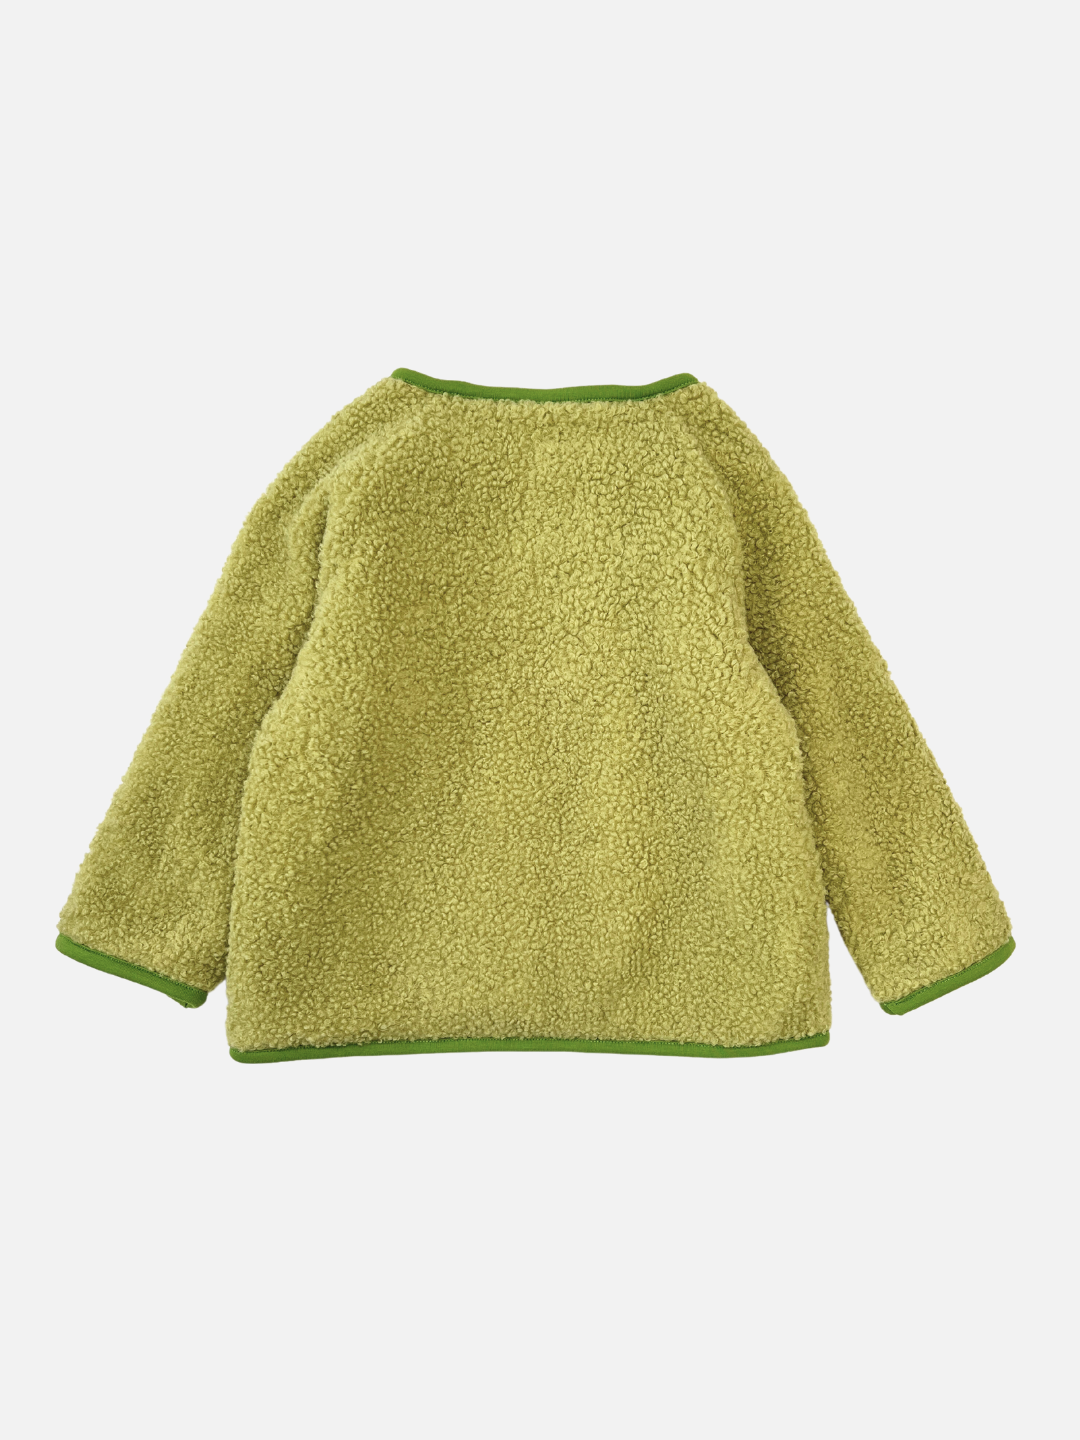 Matcha | Back view of a kids light green collarless fleece jacket with four brown buttons.